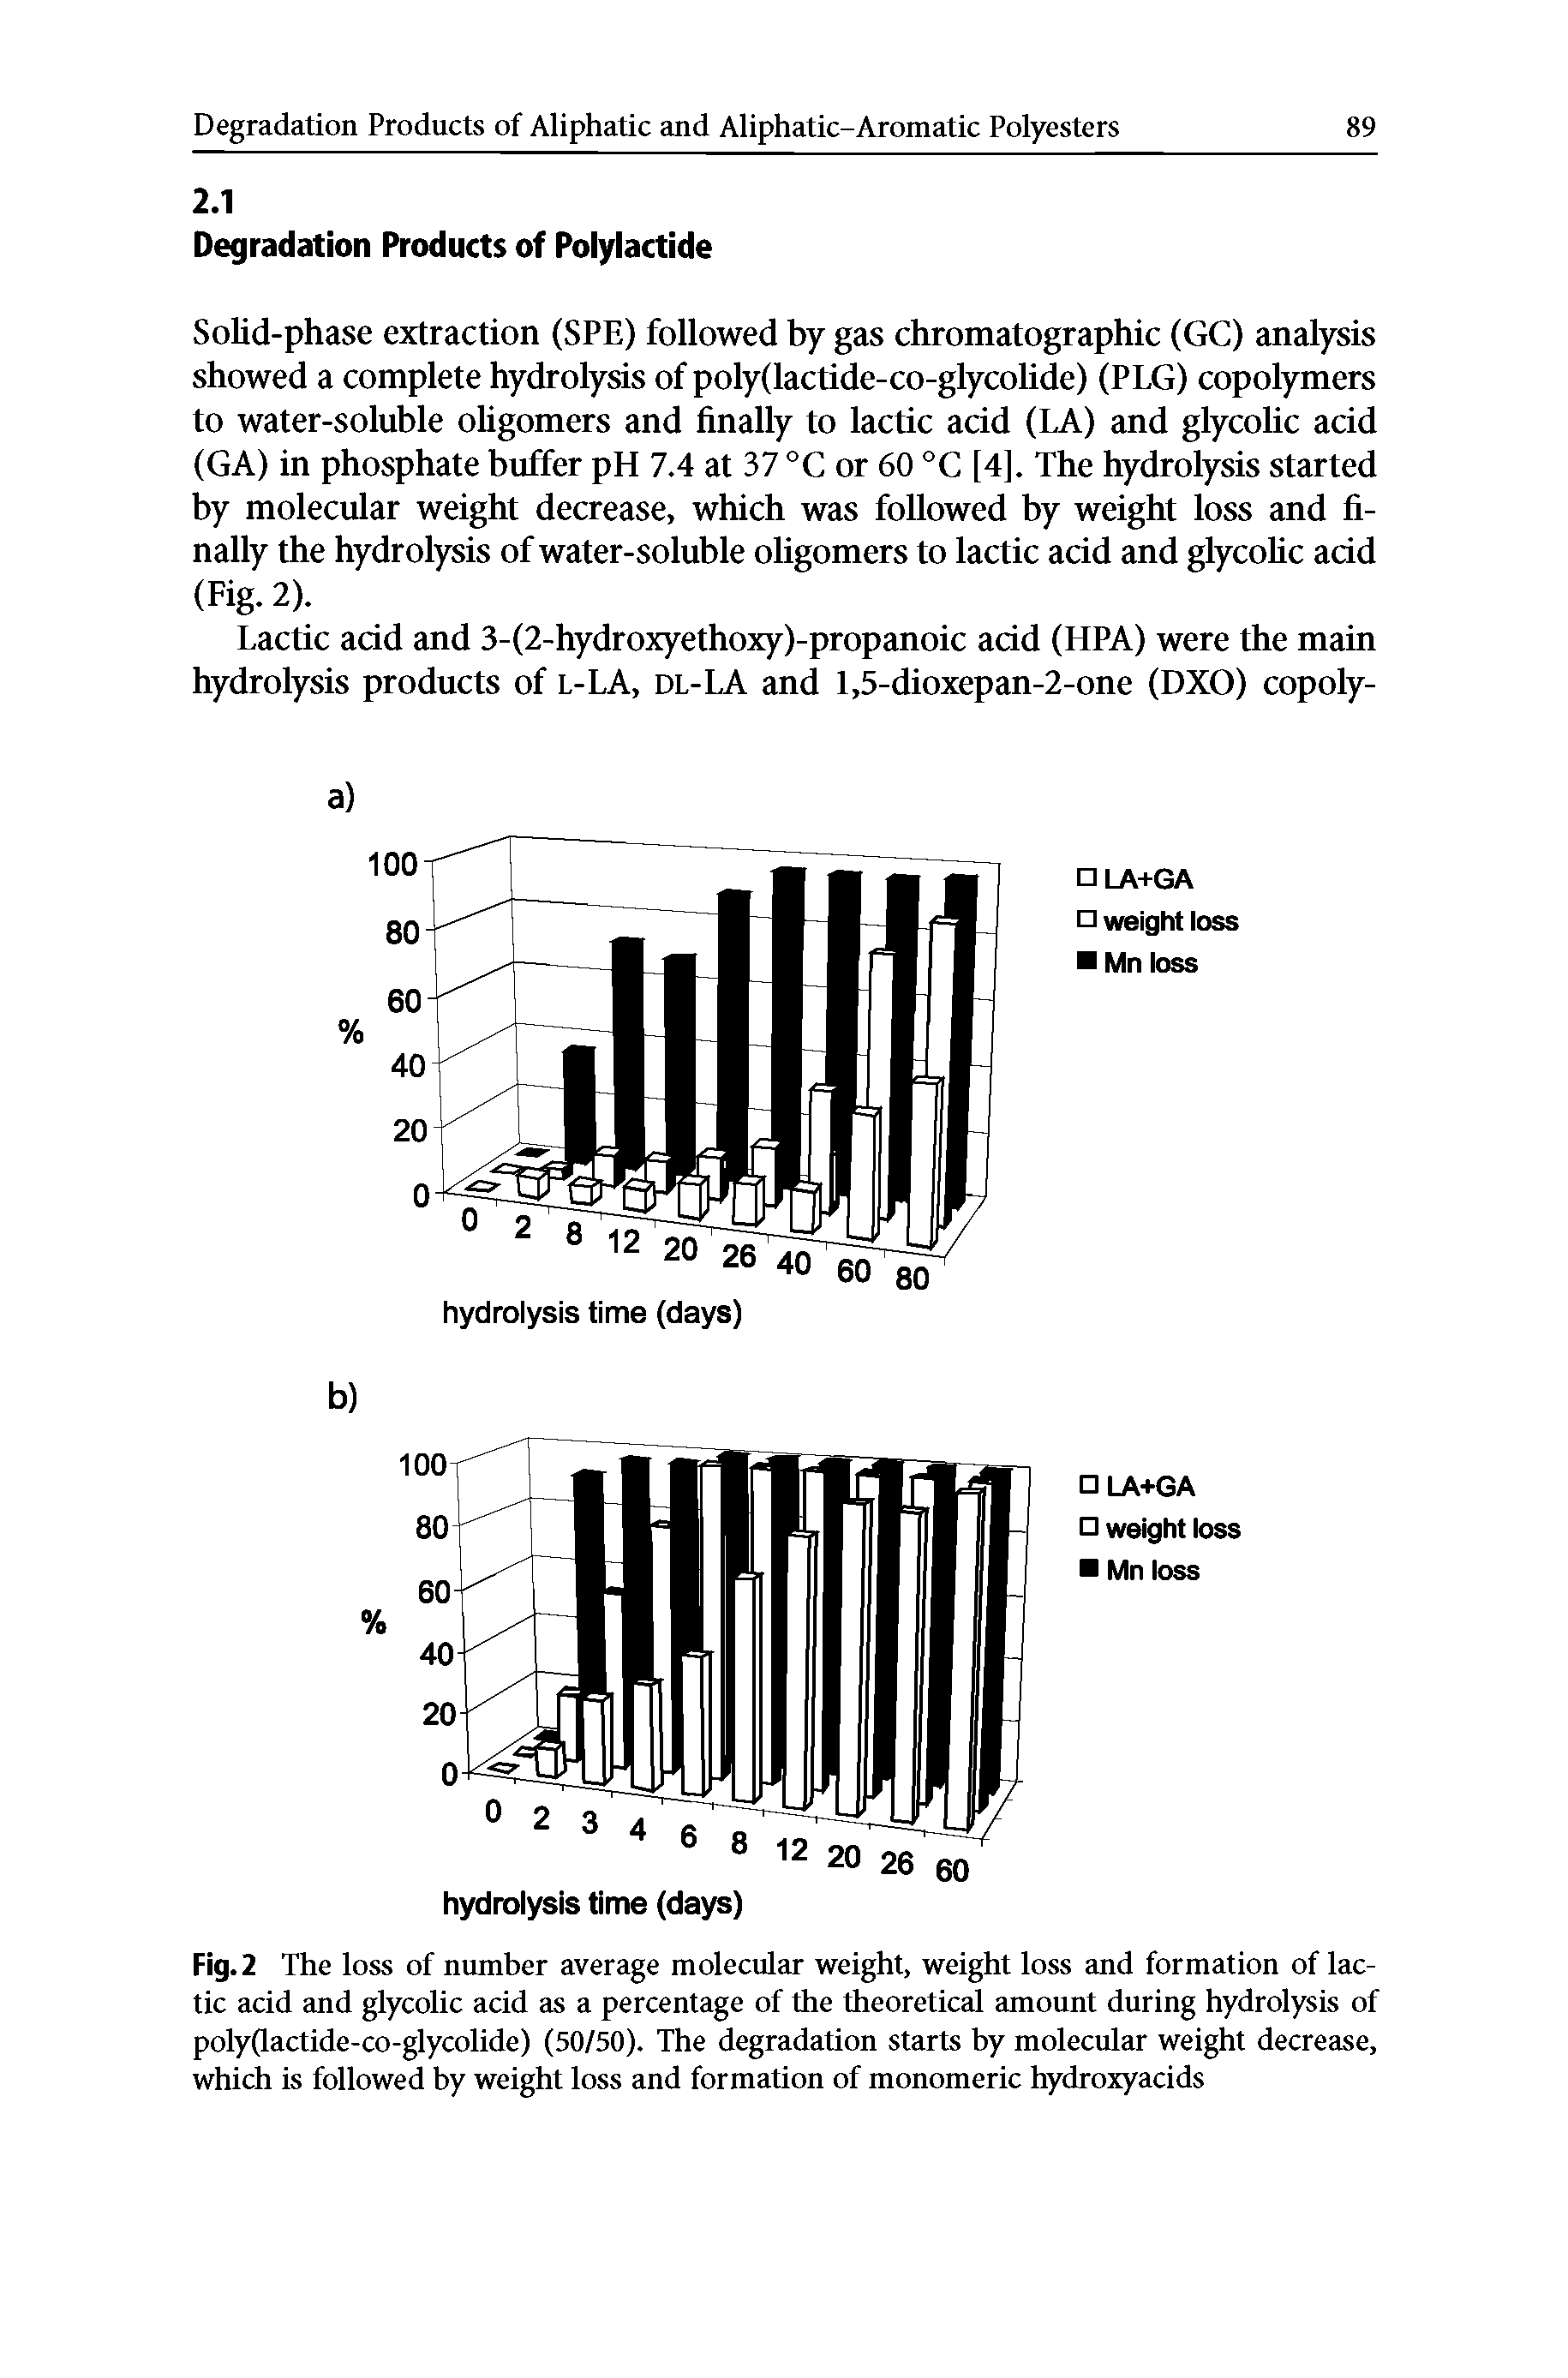 Fig. 2 The loss of munber average molecular weight, weight loss and formation of lactic acid and glycohc acid as a percentage of the theoretical amount during hydrolysis of polyfiactide-co-glycolide) (50/50). The degradation starts by molecular weight decrease, which is followed by weight loss and formation of monomeric hydroxyacids...